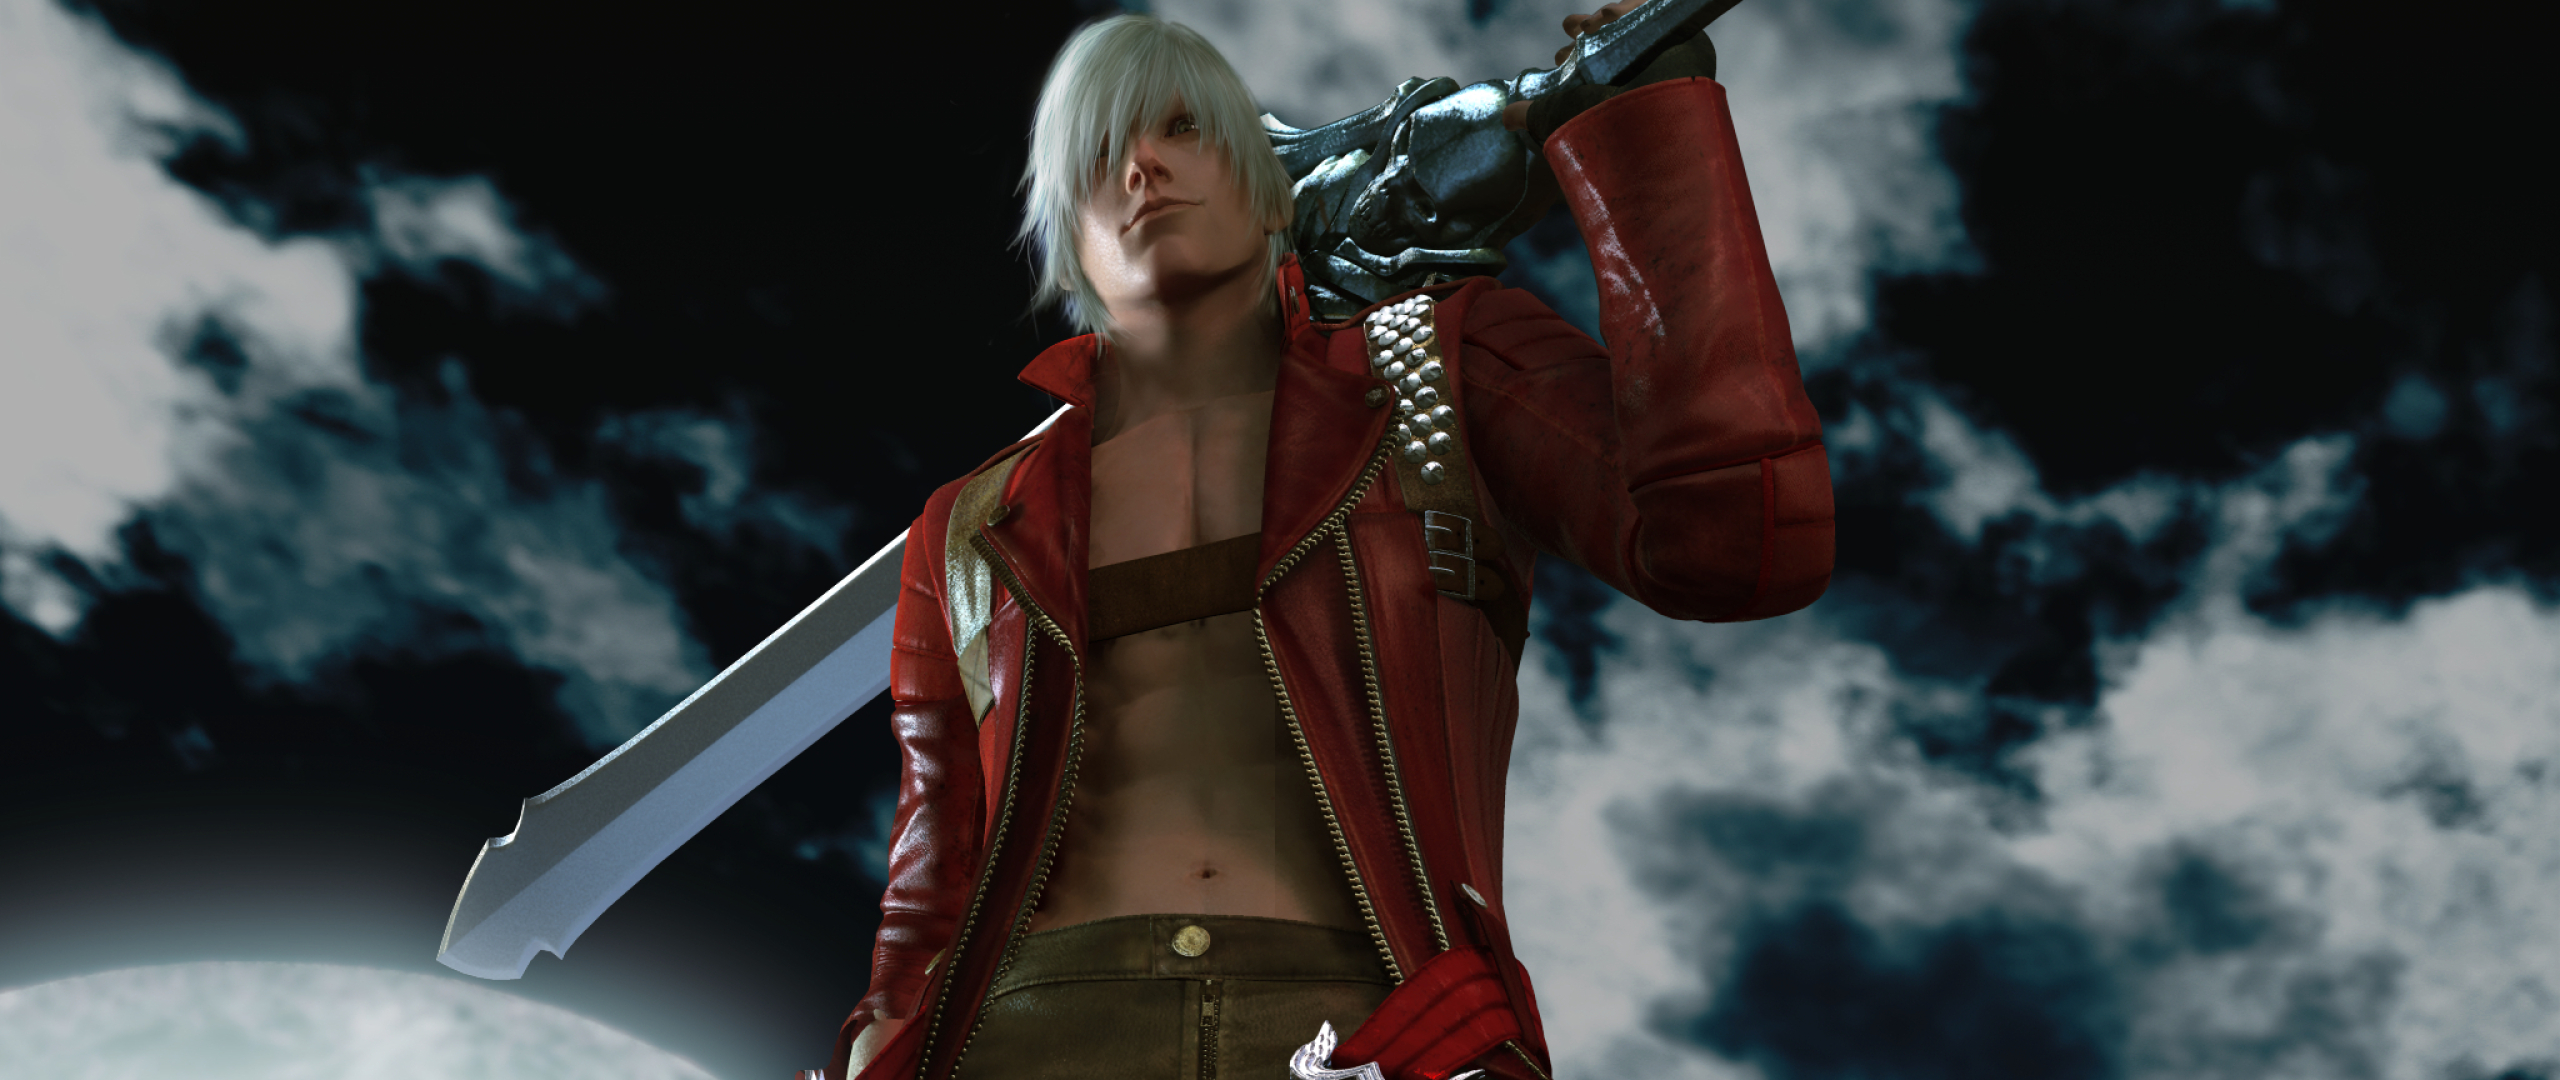 2560x1080 Devil May Cry 3 2560x1080 Resolution Wallpaper Hd Games 4k Wallpapers Images Photos And Background